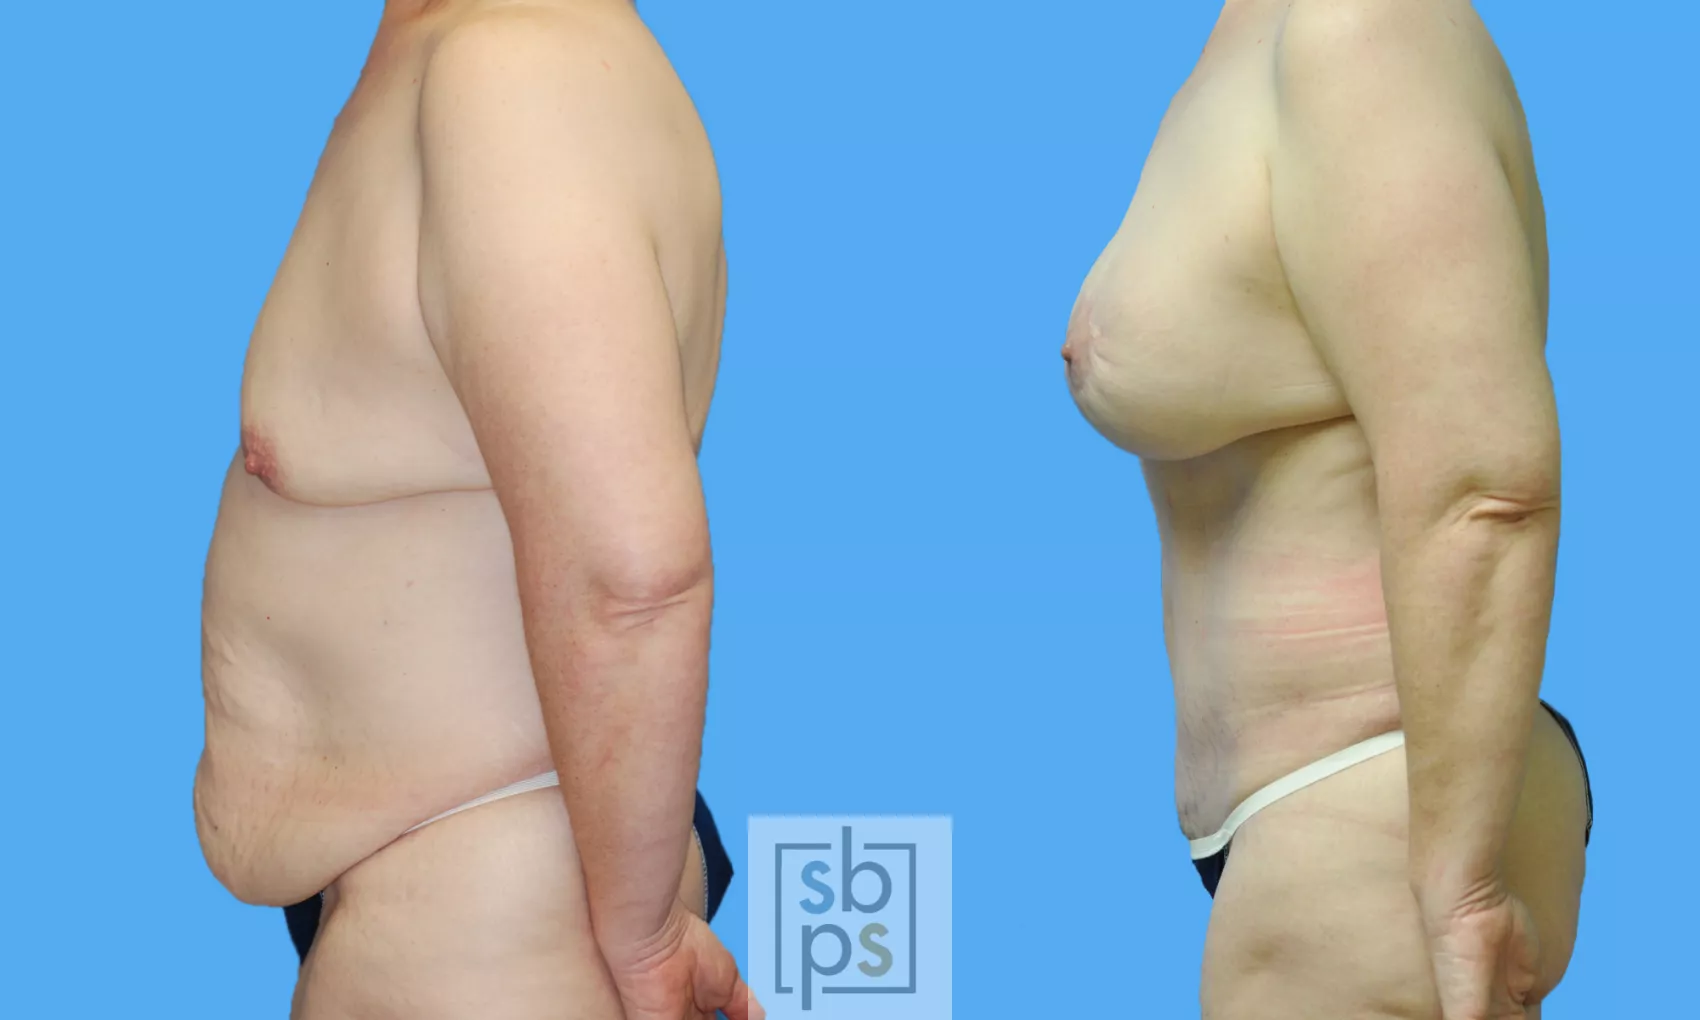 Droopy Breasts After Losing Weight? Consider A Breast Lift